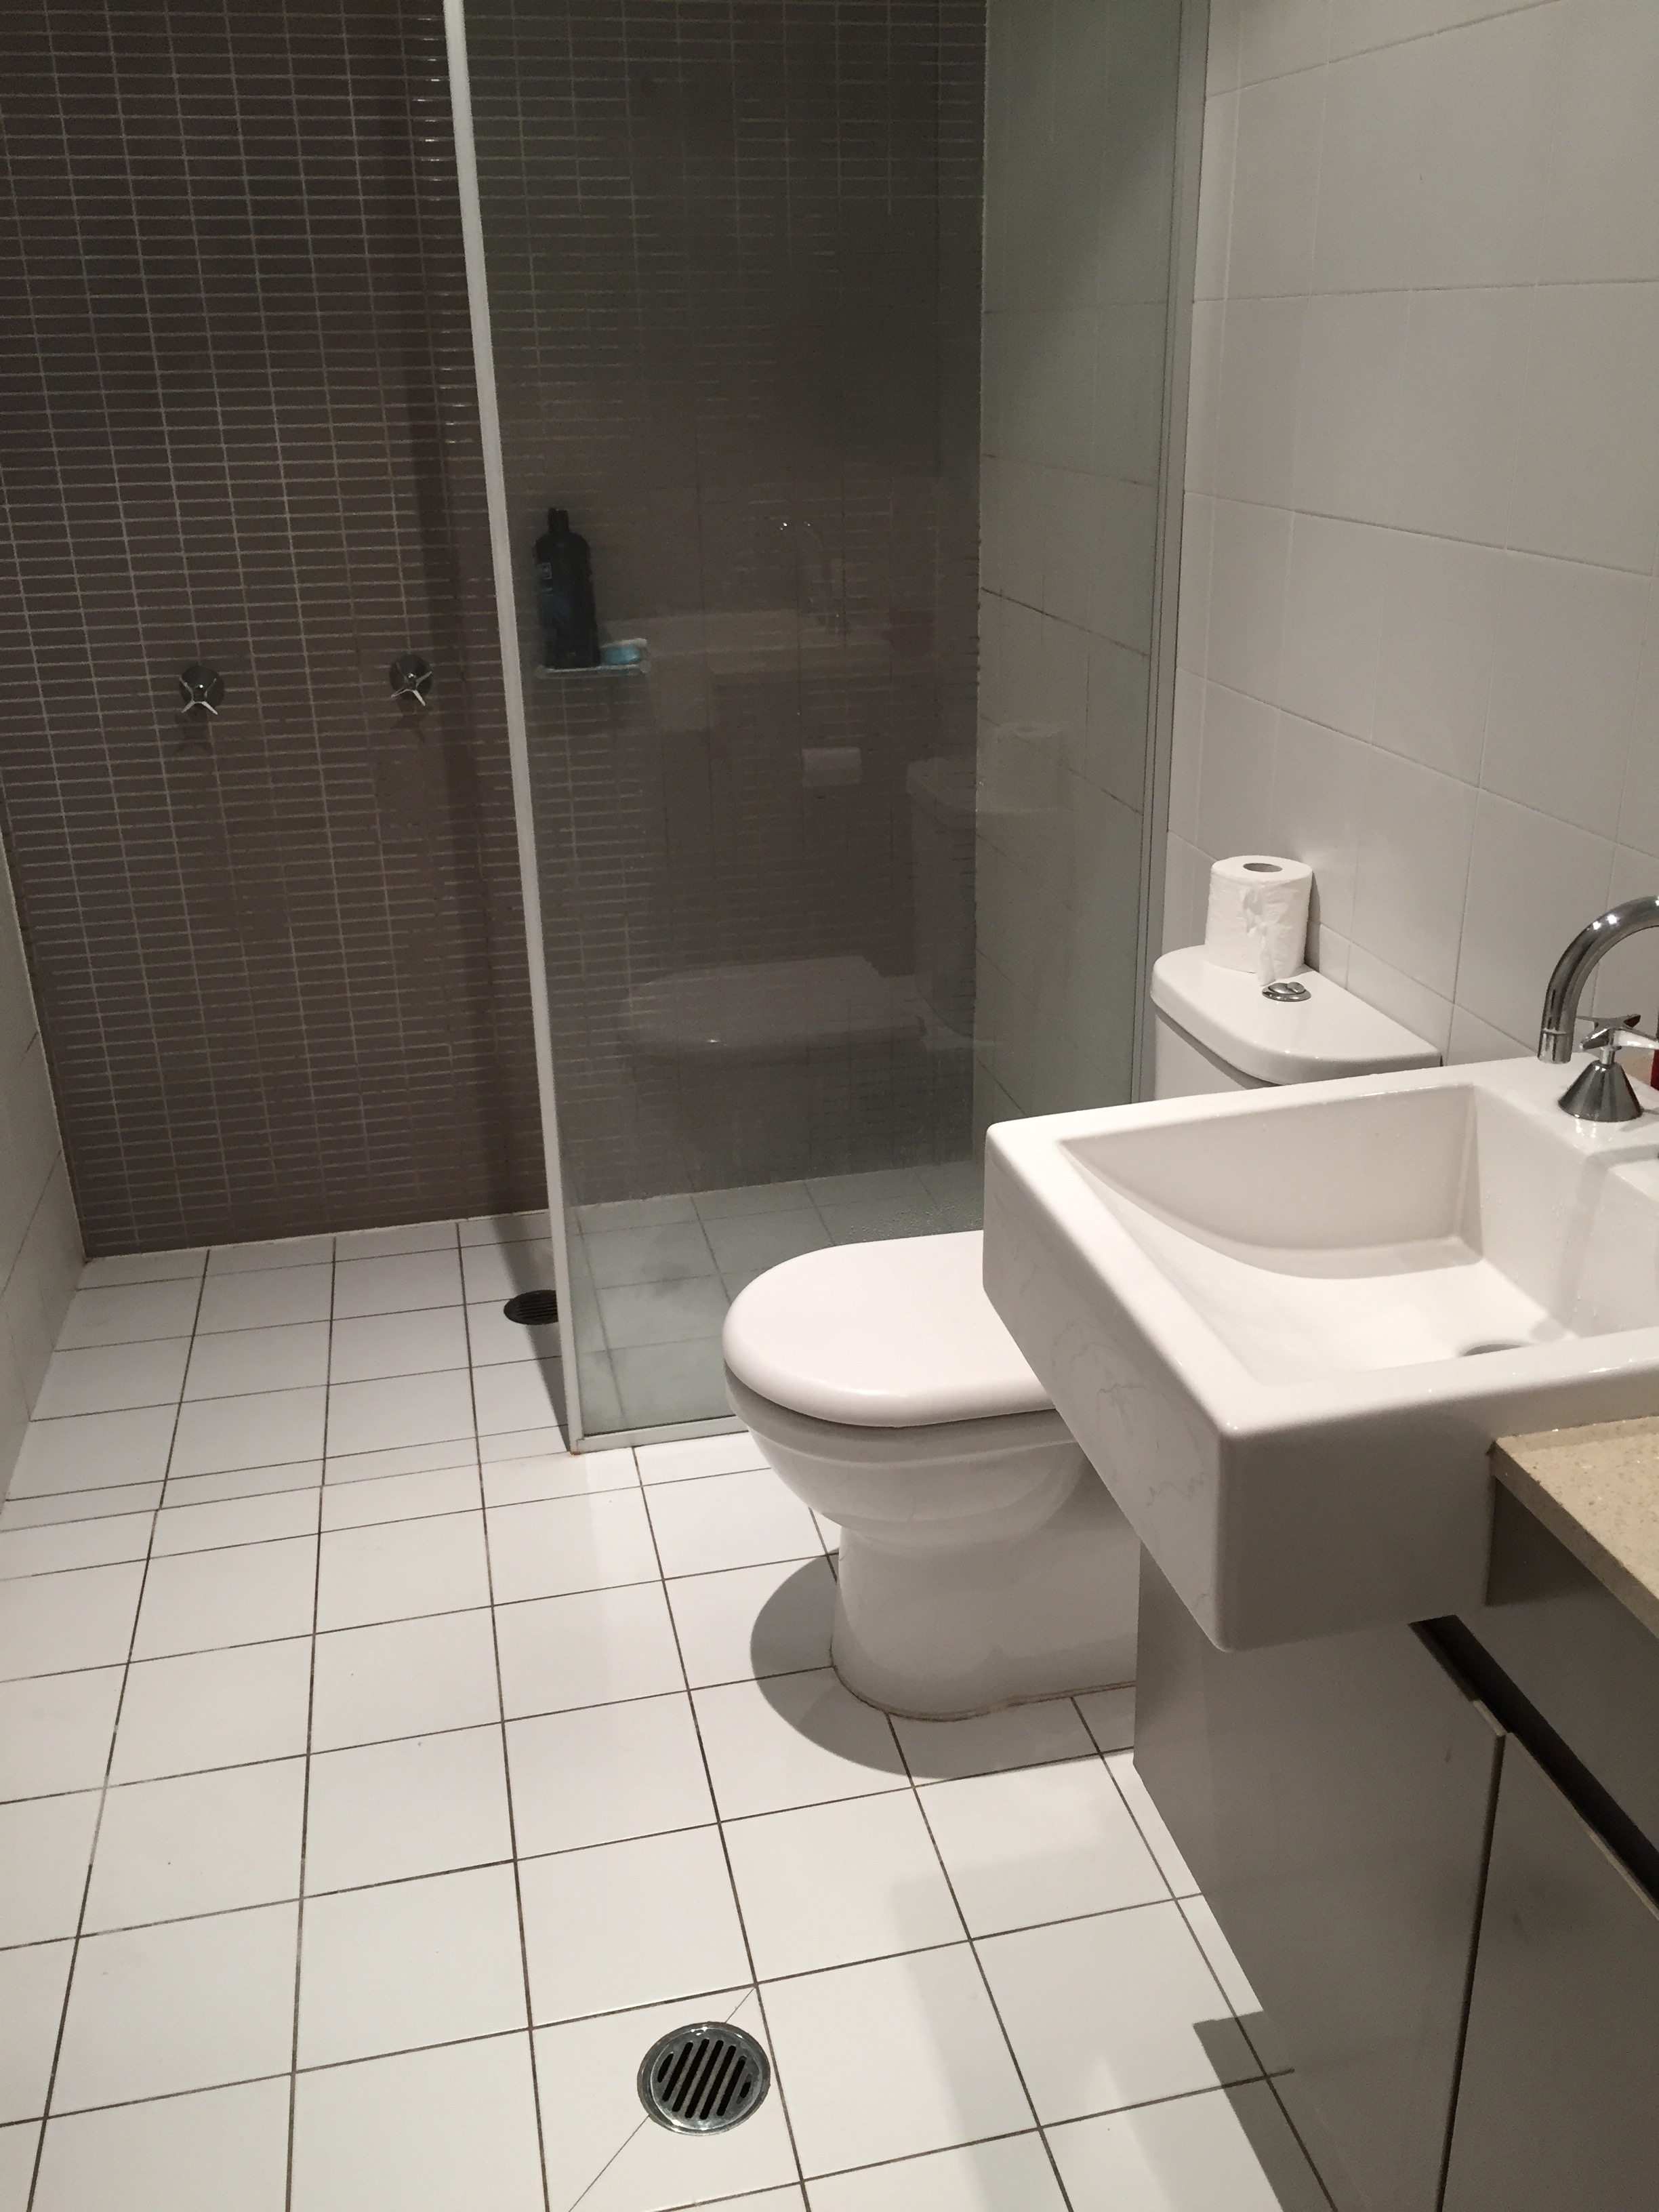 walk-in shower, toilet and sink that make up the ensuite in an Airbnb rental in Sydney